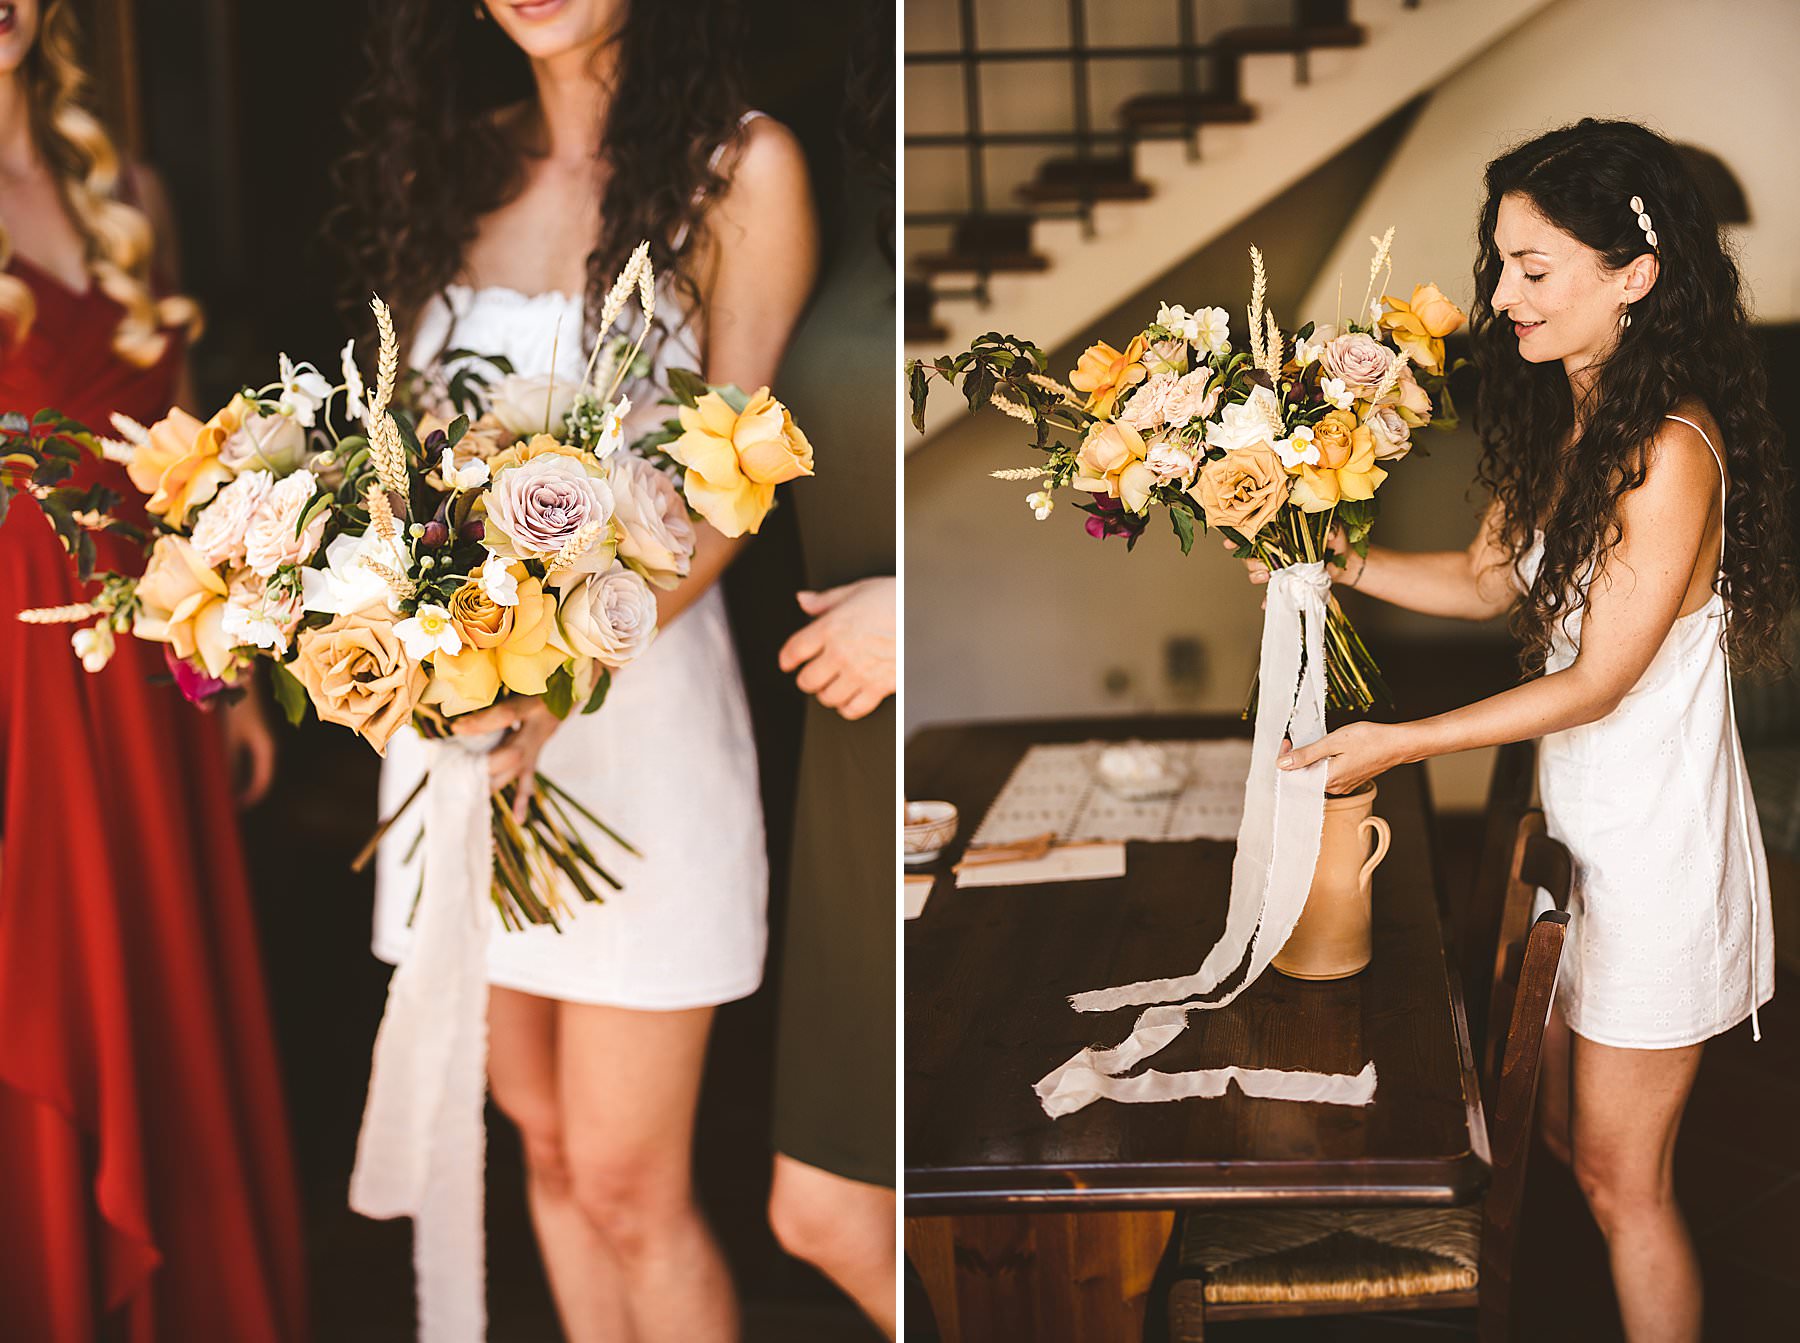 Sweet bride with gorgeous flower bouquet made by Luca Cozza flower designer at La Valle farmhouse in Montaione